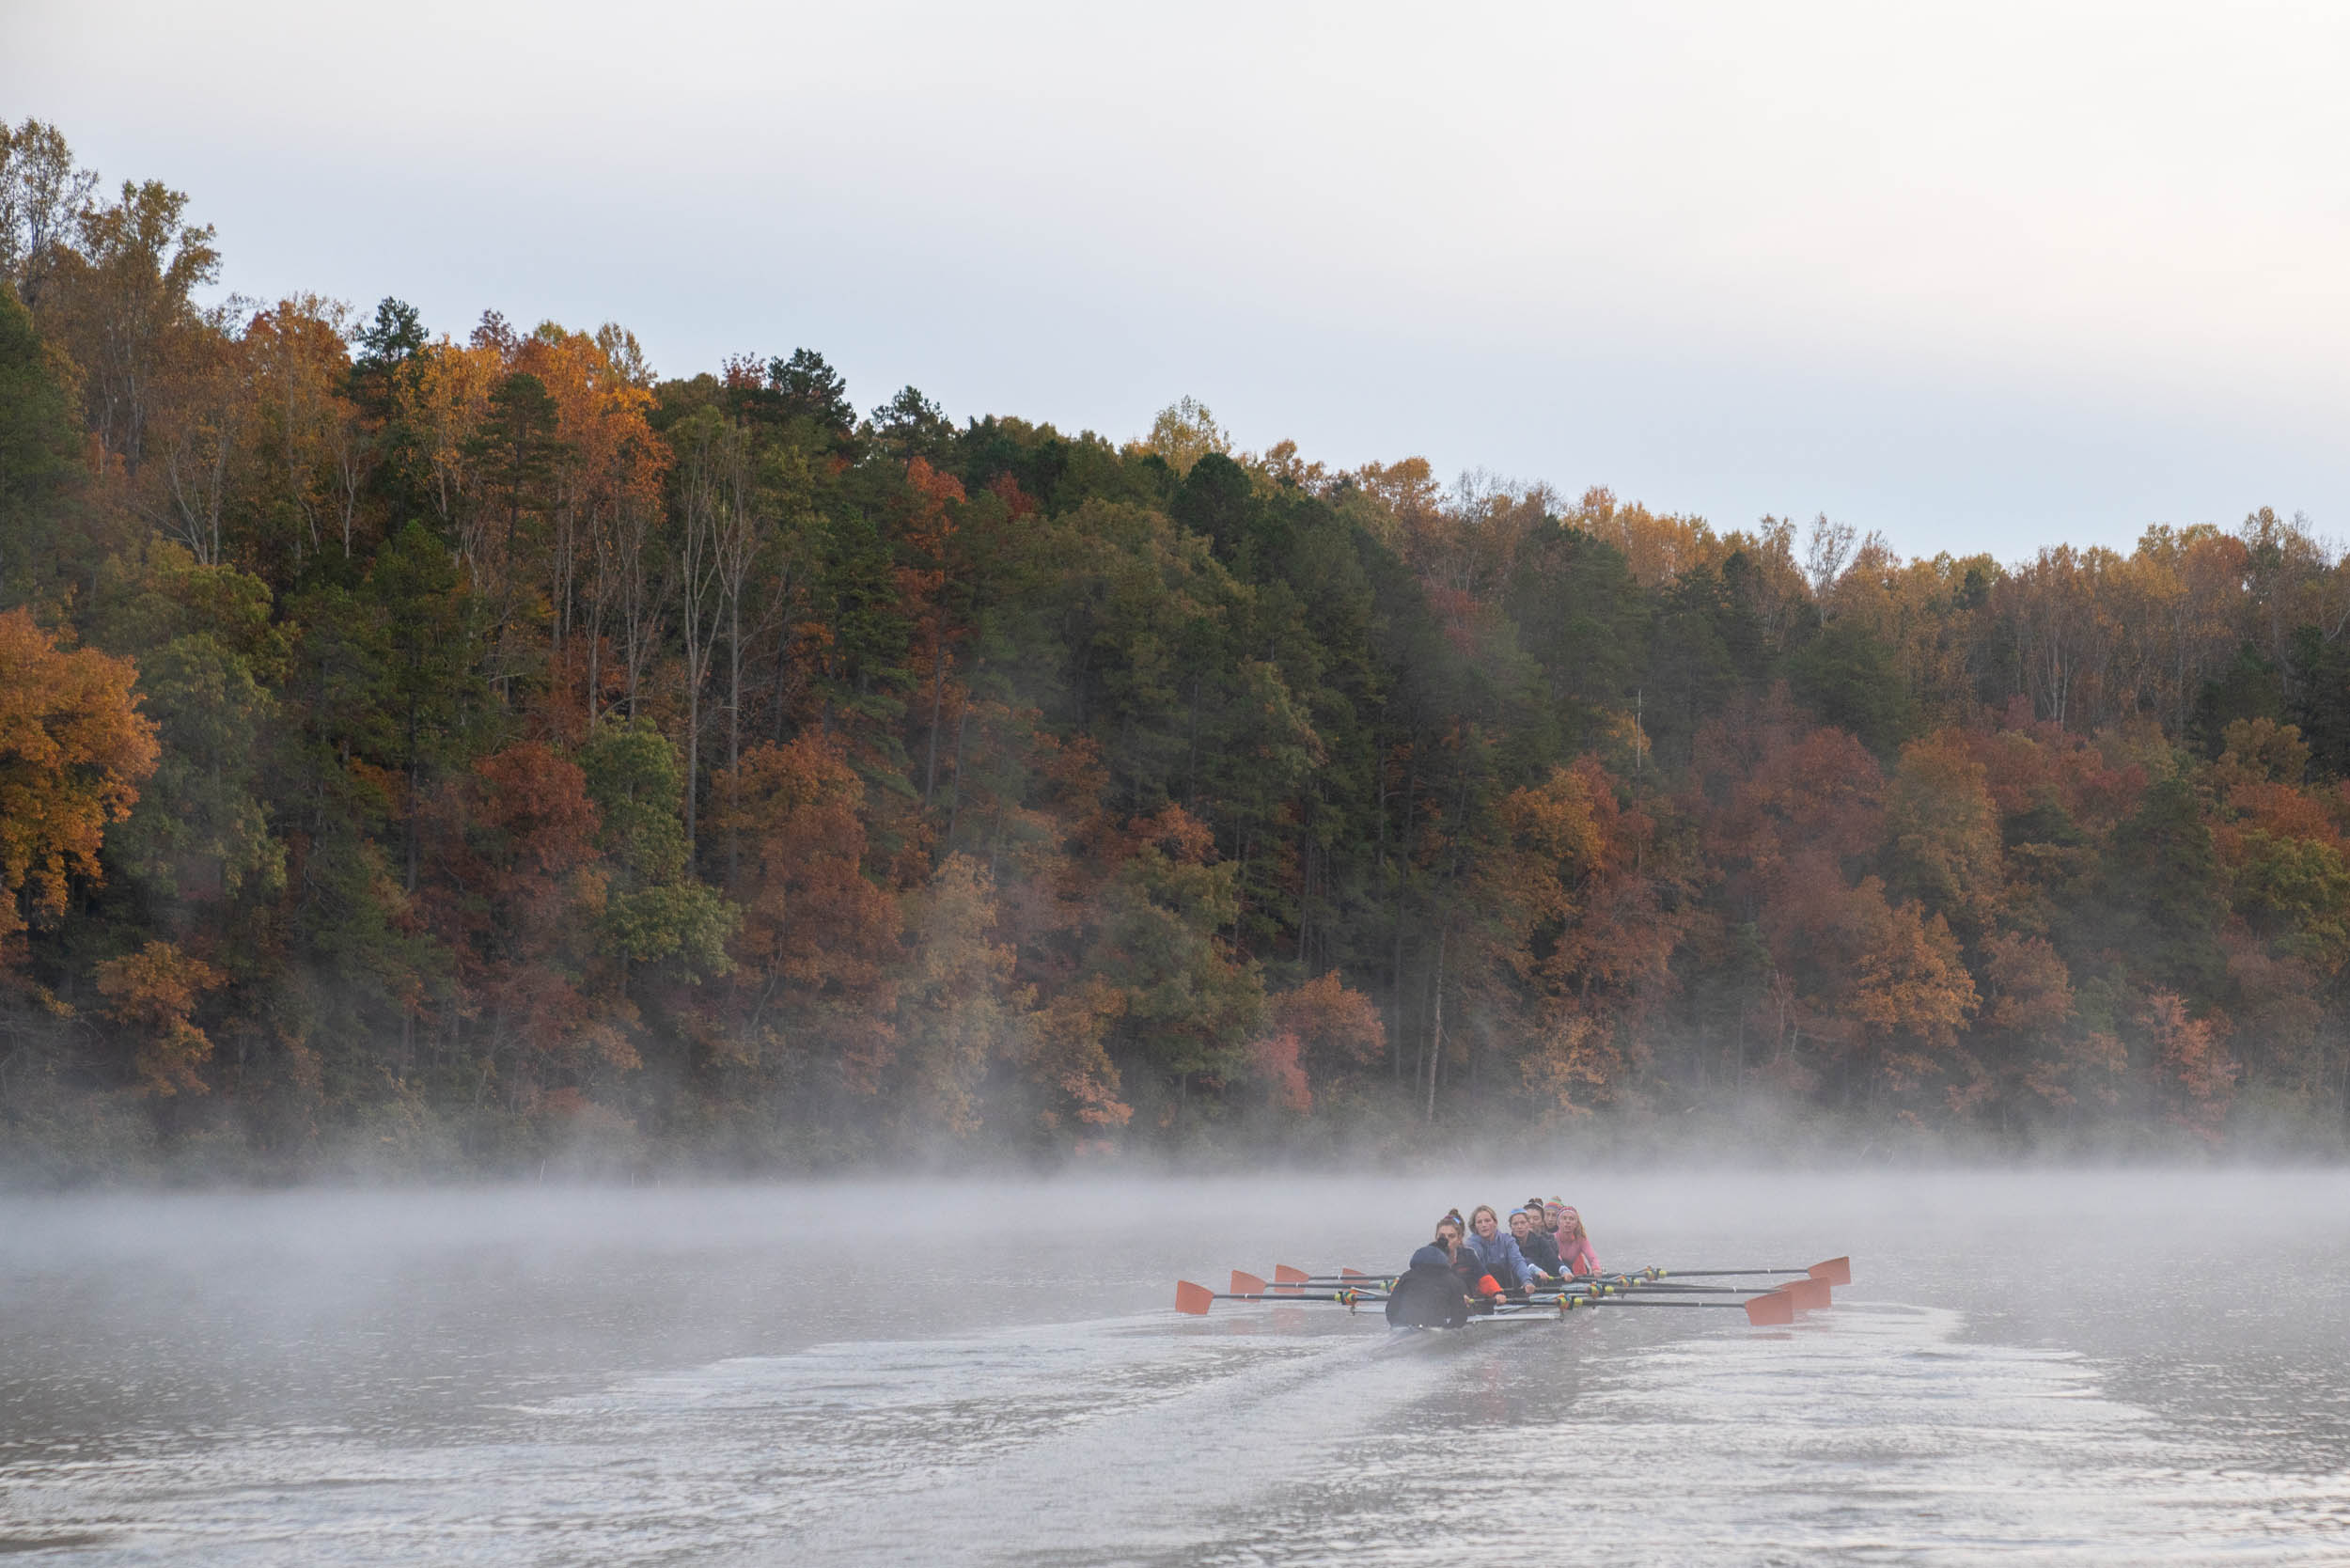 Rowing team on a.foggy river with the surrounding trees turning various colors